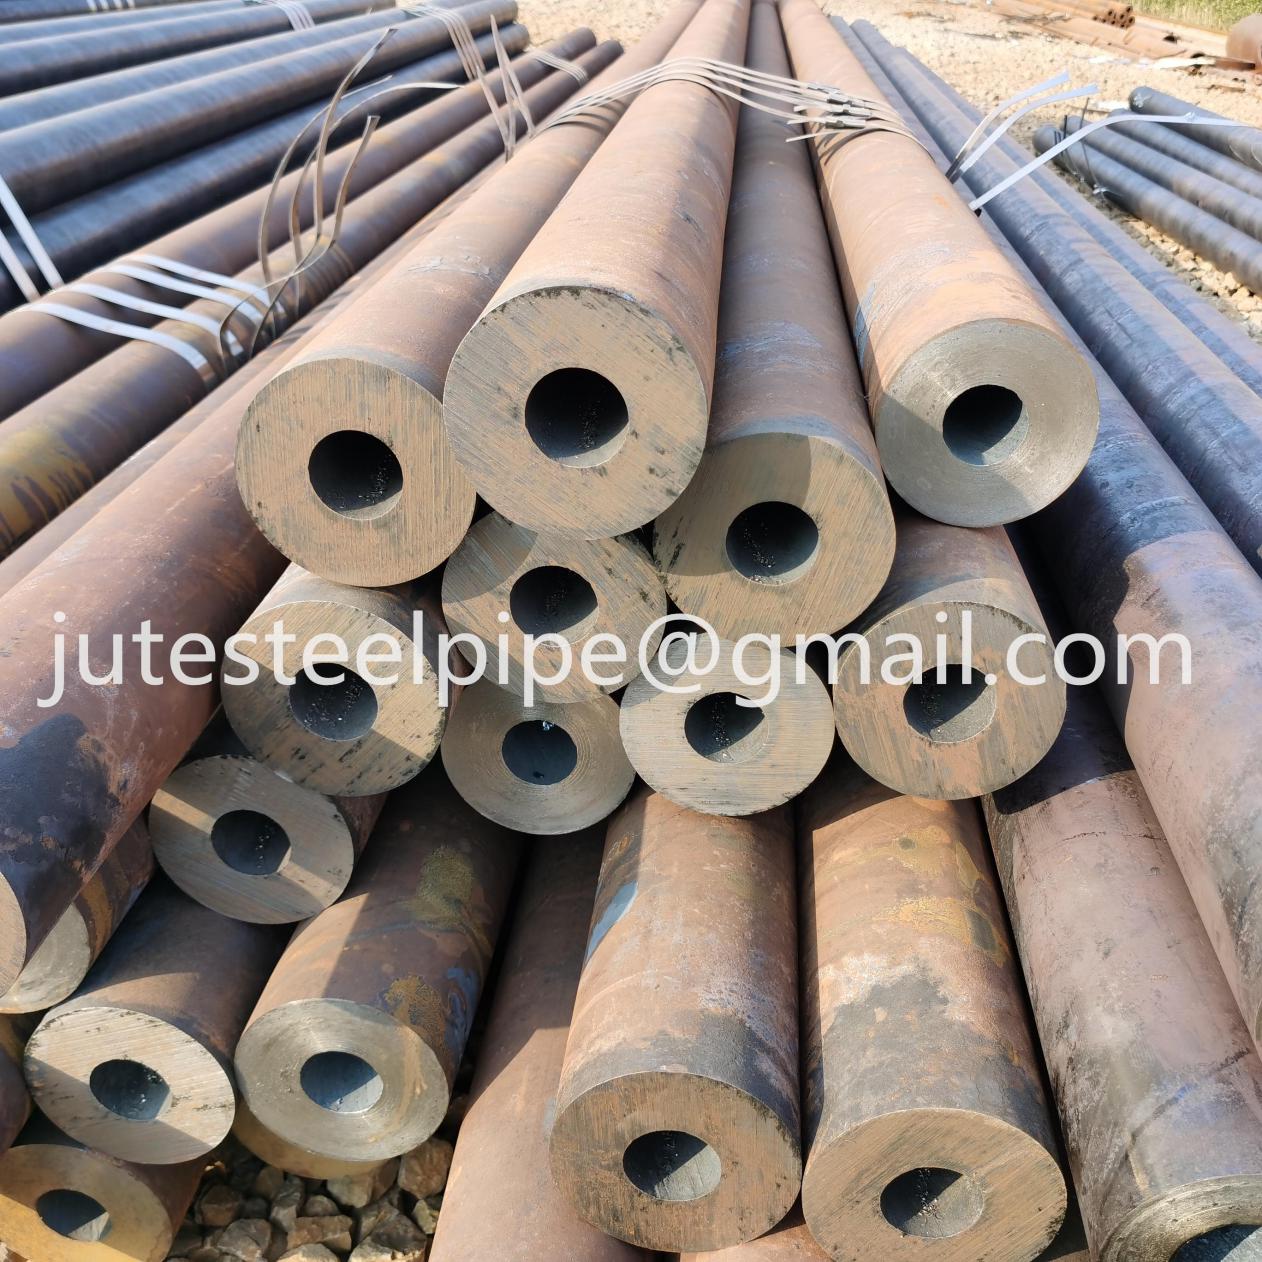 Shandong Jute Pipe Industry Co., Ltd. 6,200 tons of vanadium-containing thread steel products are directly supplied to Changjiang nuclear power project